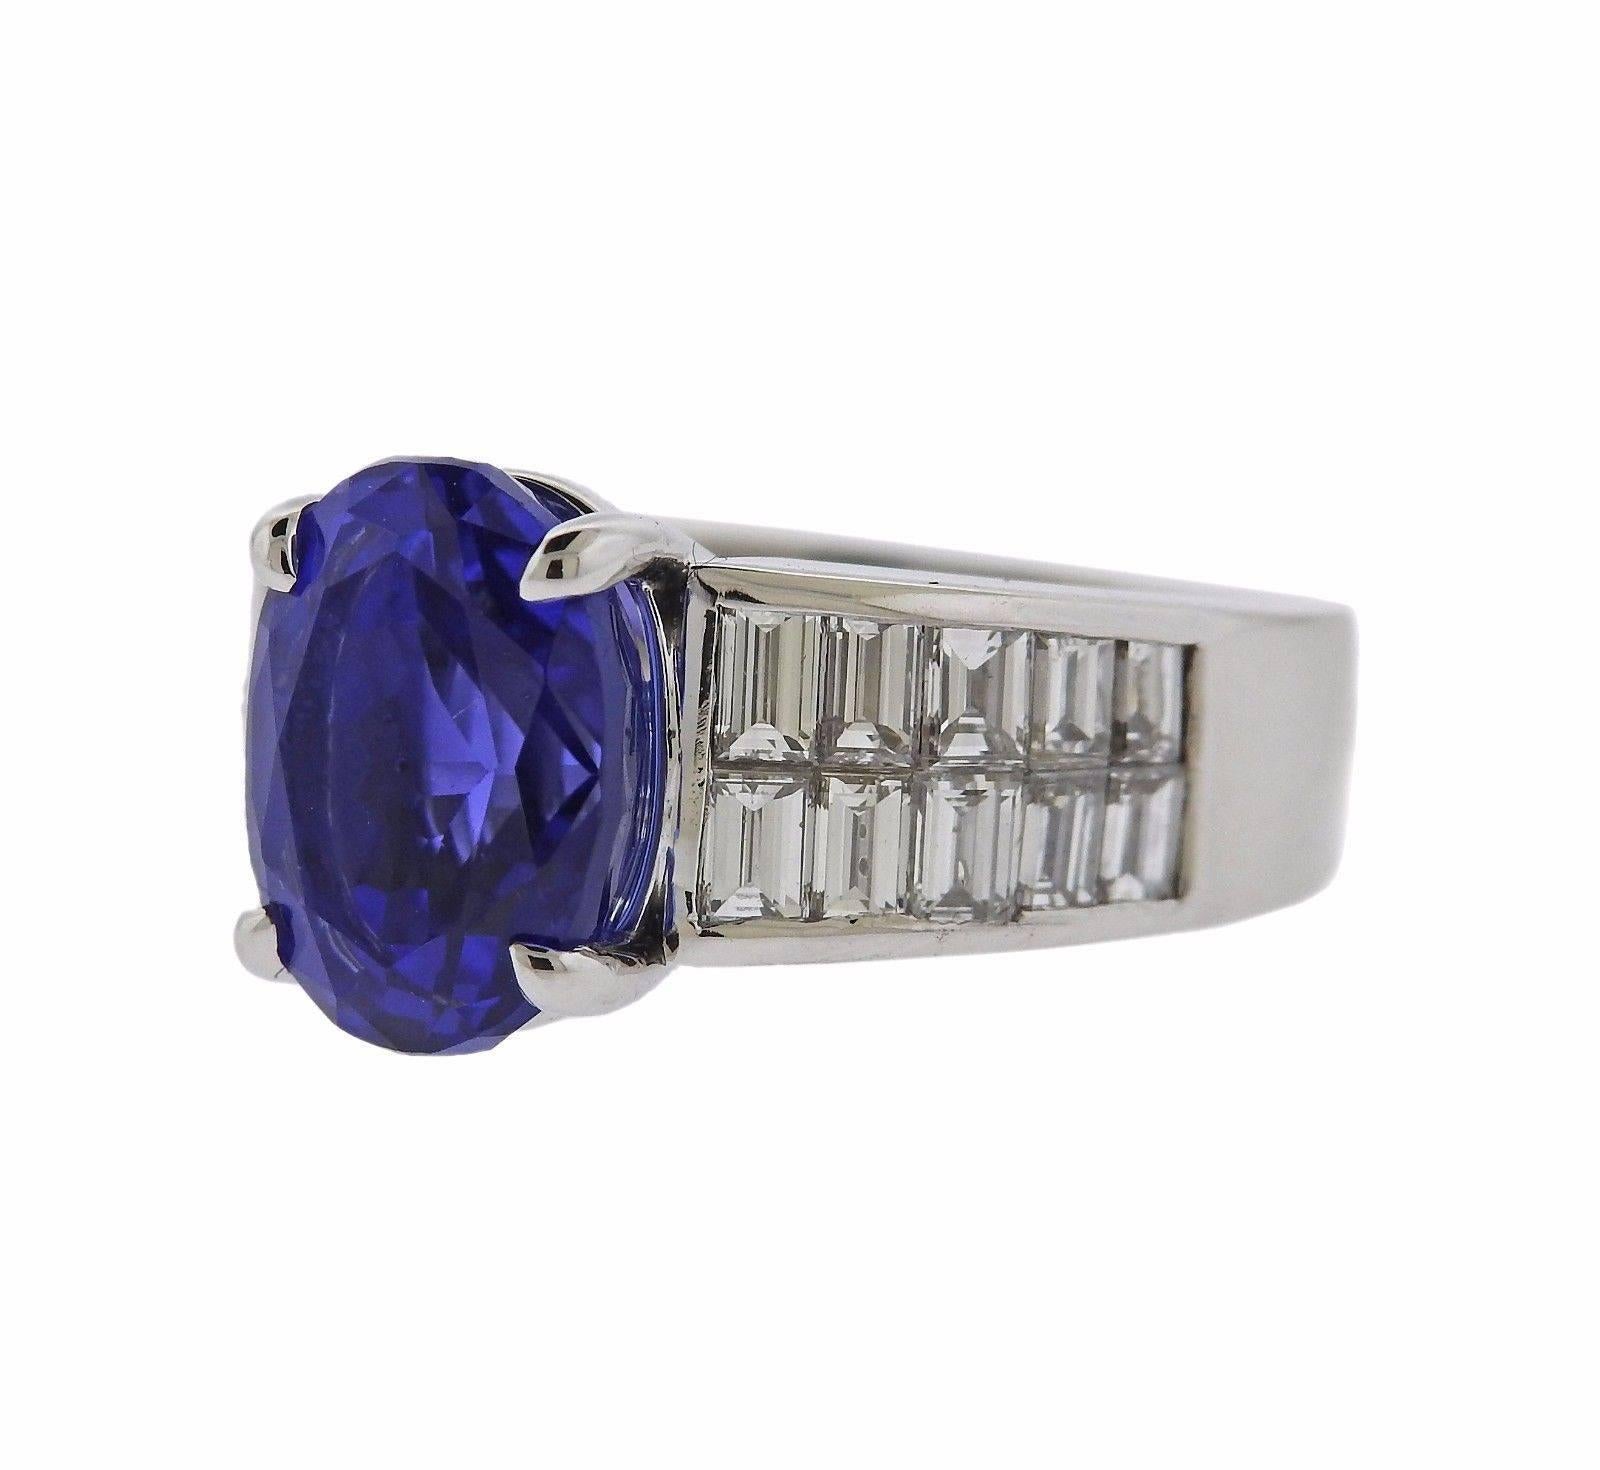 A 14k white gold ring set with a tanzanite weighing approximately 4.75 carats and approximately 0.80ctw of H/VS diamonds.  The ring is a size 5 1/4 and weighs 7.9 grams.  Marked: 14k, HT&NY.